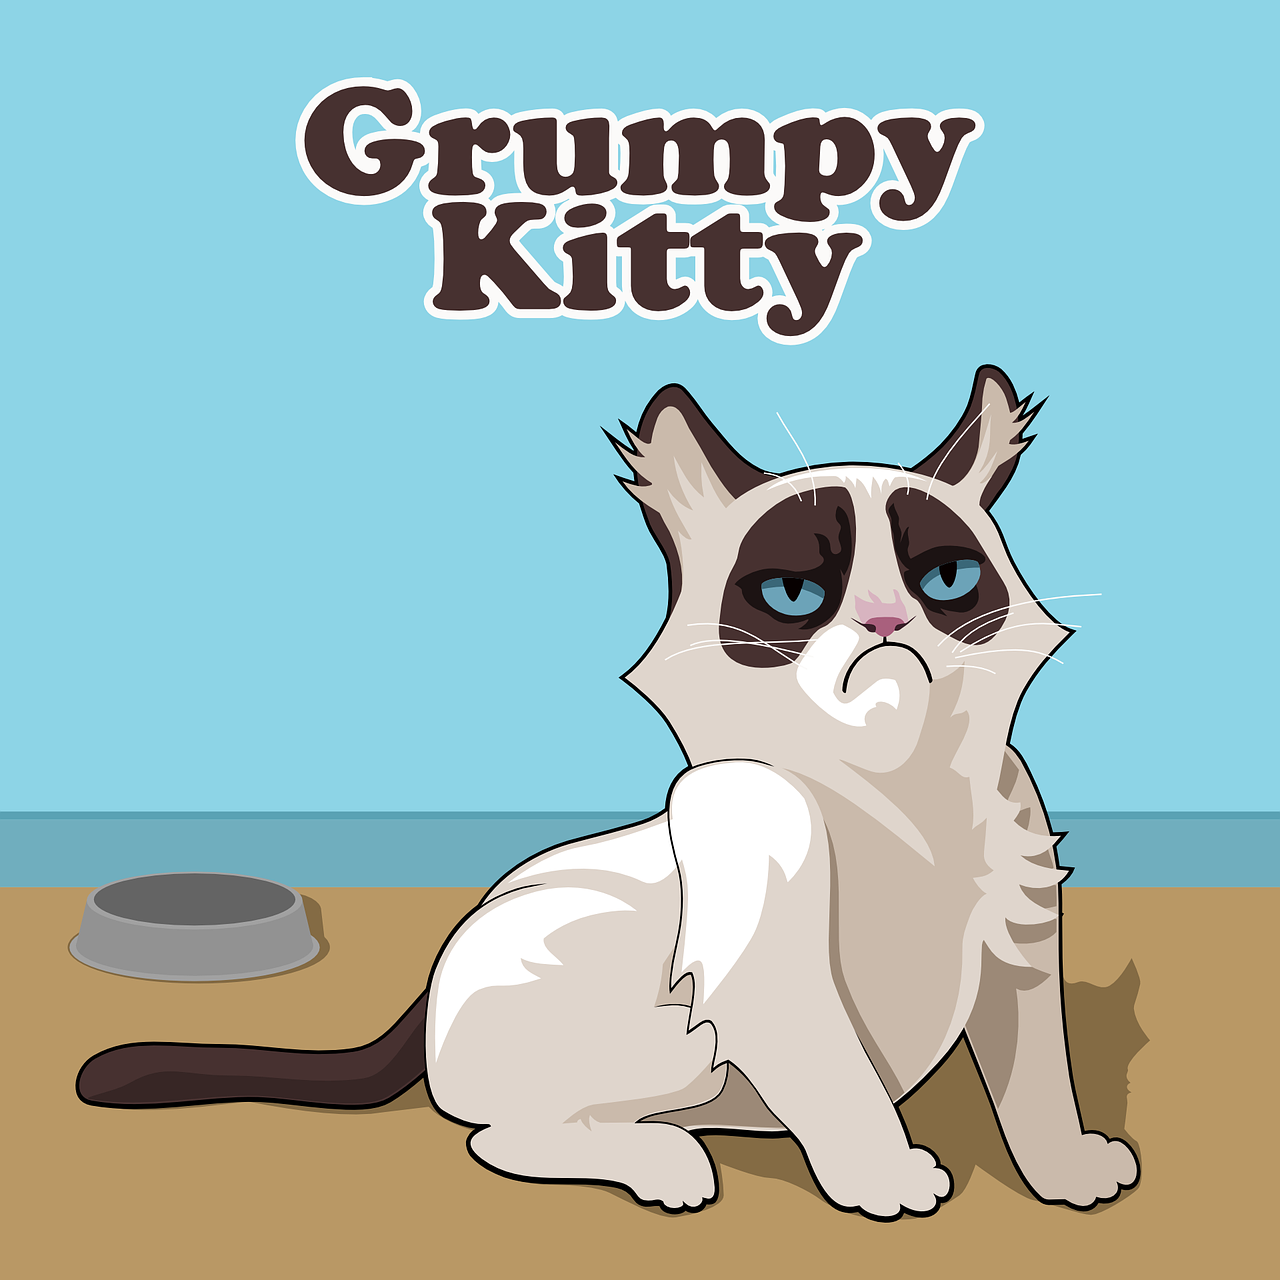 a grumpy kitty sitting next to a bowl of food, an illustration of, by Nyuju Stumpy Brown, shutterstock, furry art, vector illustration, mascot illustration, poster illustration, family guy style